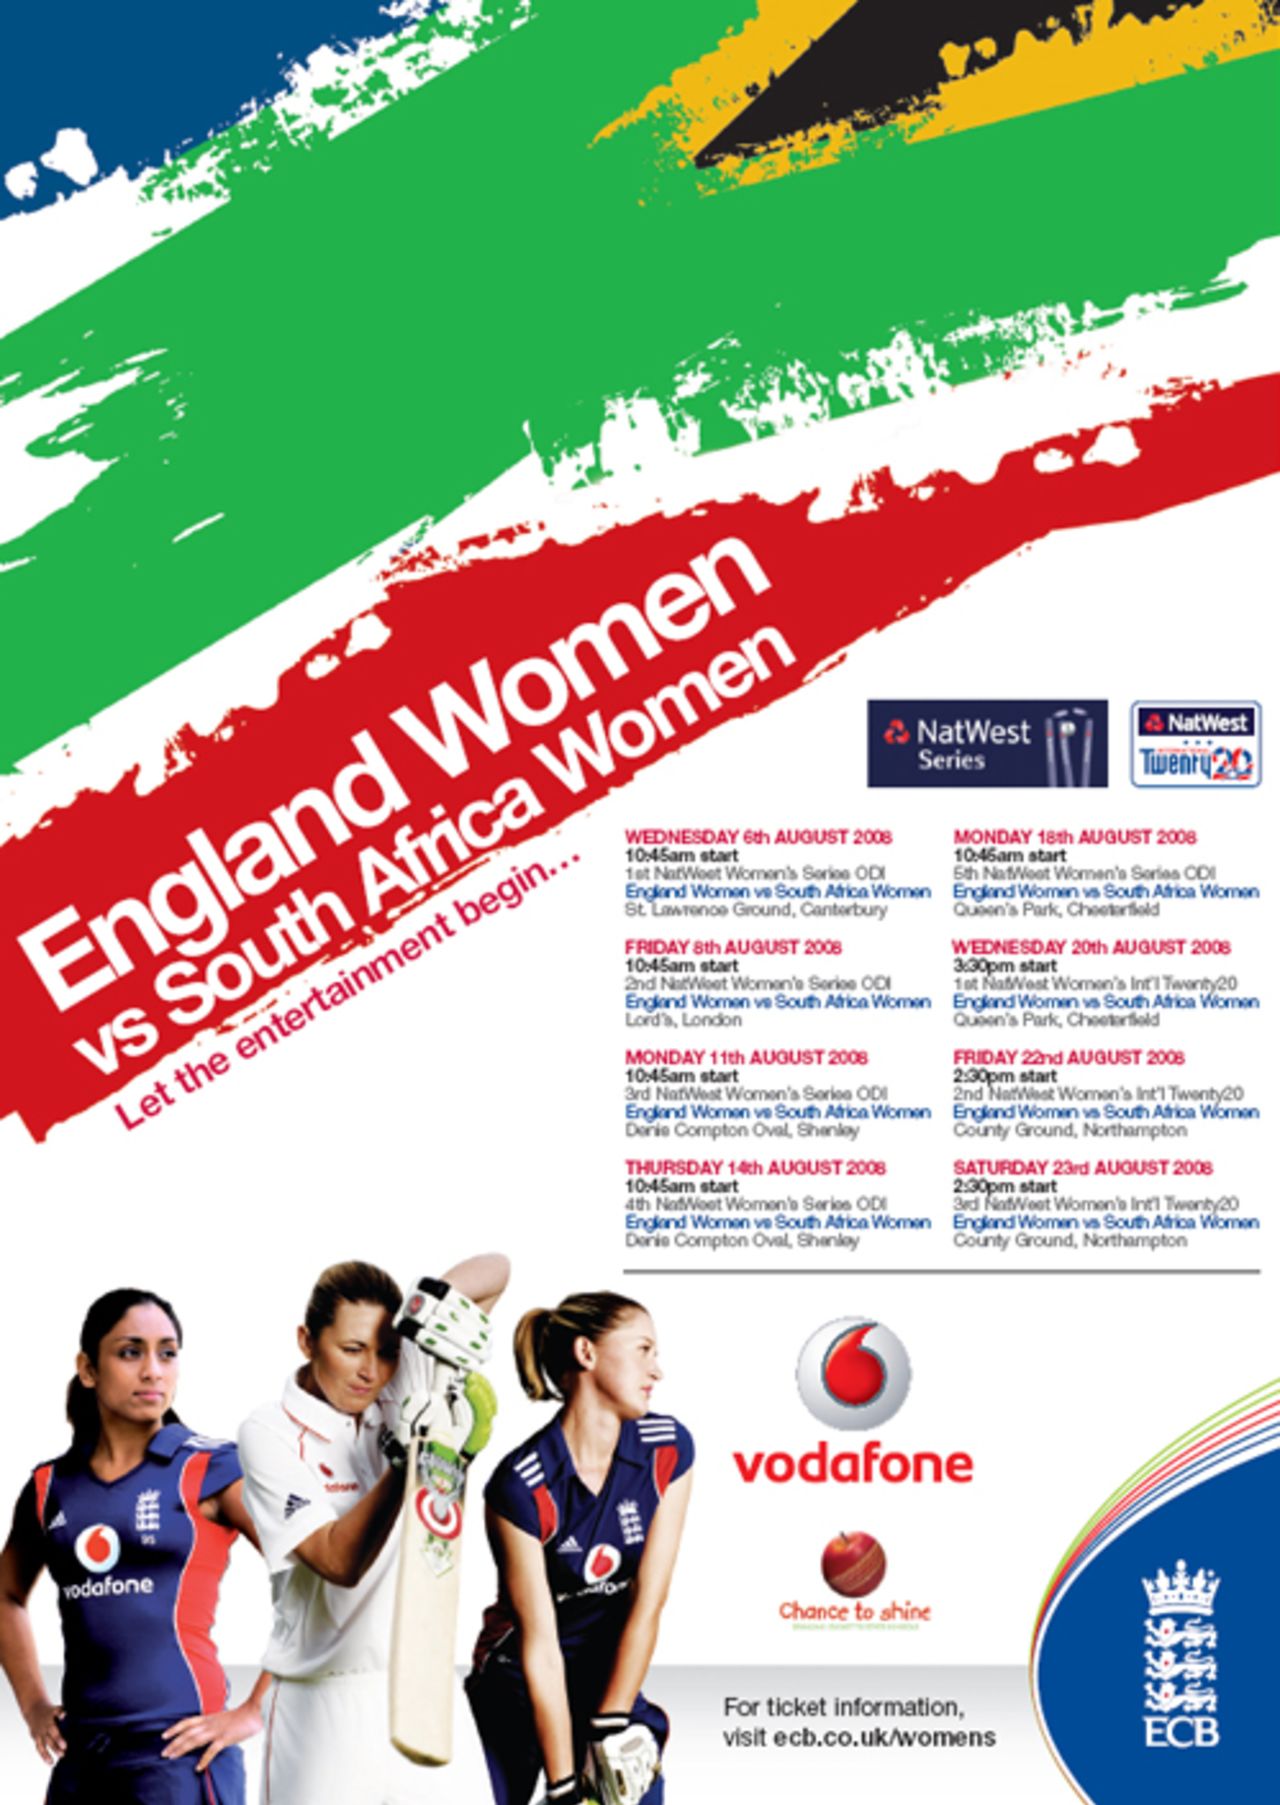 Look out South Africa - England's Isa Guha, Charlotte Edwards and Sarah Taylor are out to get you